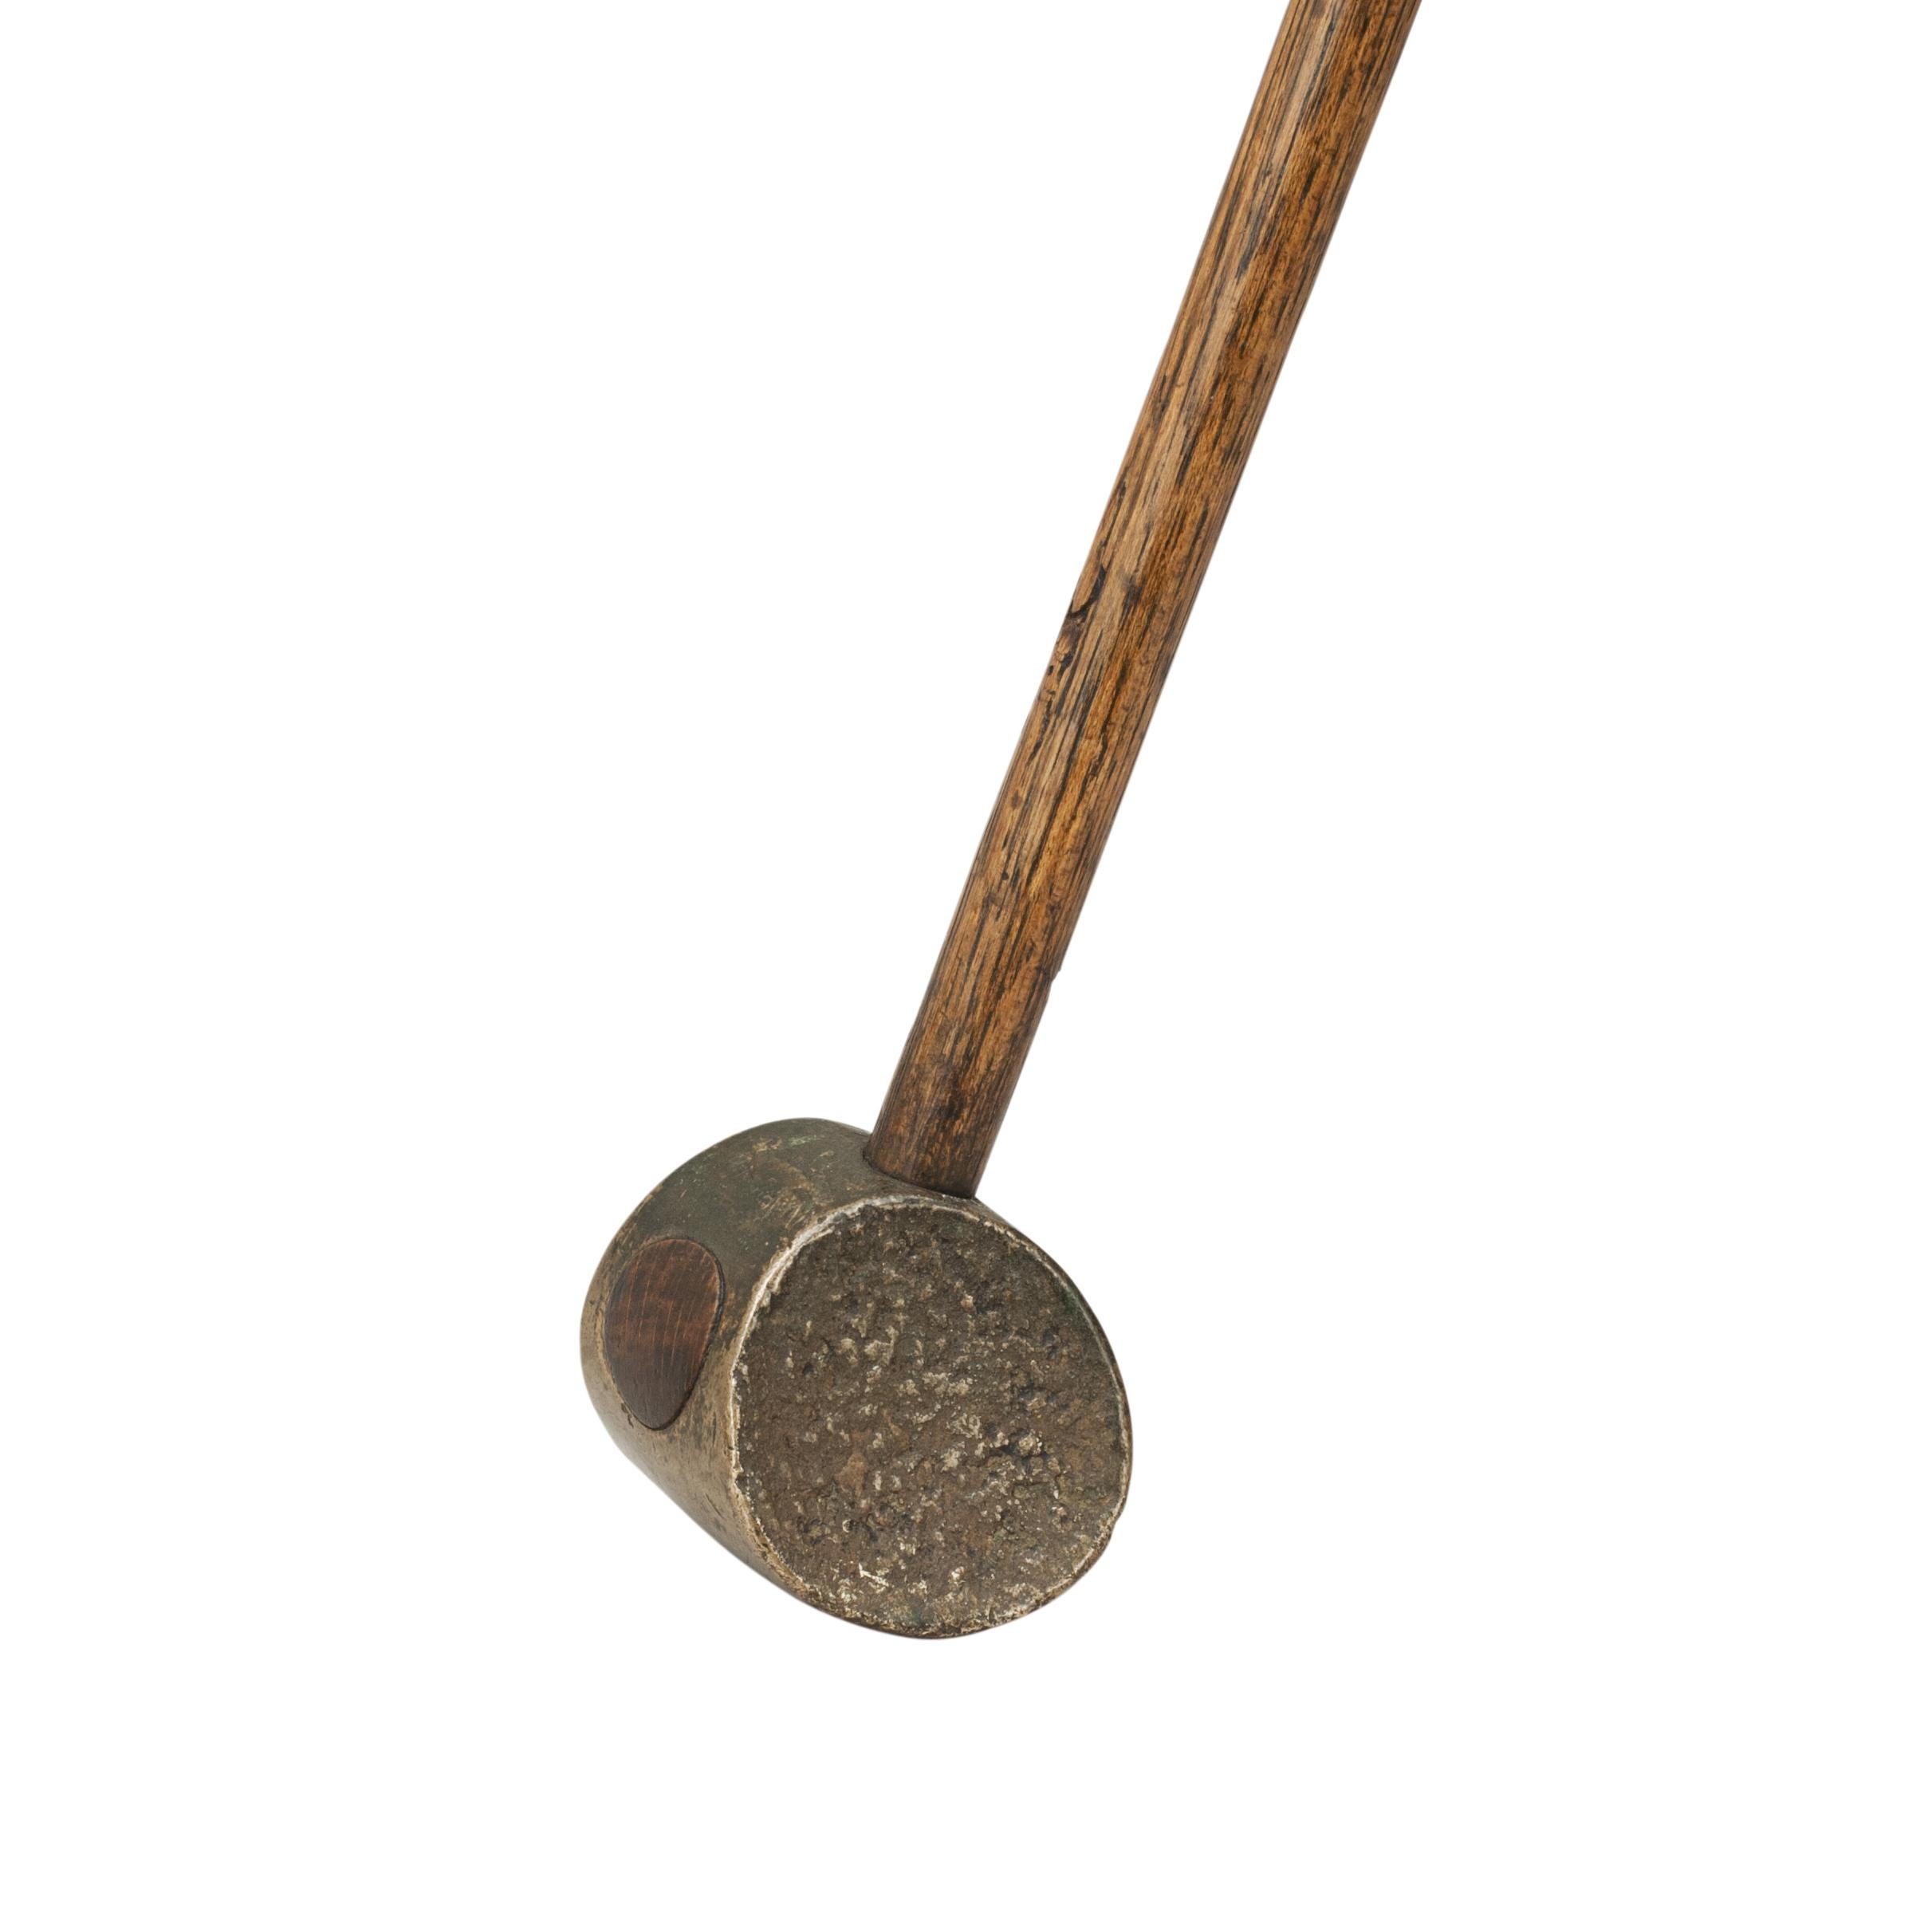 Mallet Head Golf Club by Sir Walter Dalrymple. Duplex 'Hammer ' golf club, Mashie and a Putter, by Sir Walter Dalrymple (the Baronet of North Berwick). The double faced hammer headed club stamped No.18 with the mashie face being dished and textured,